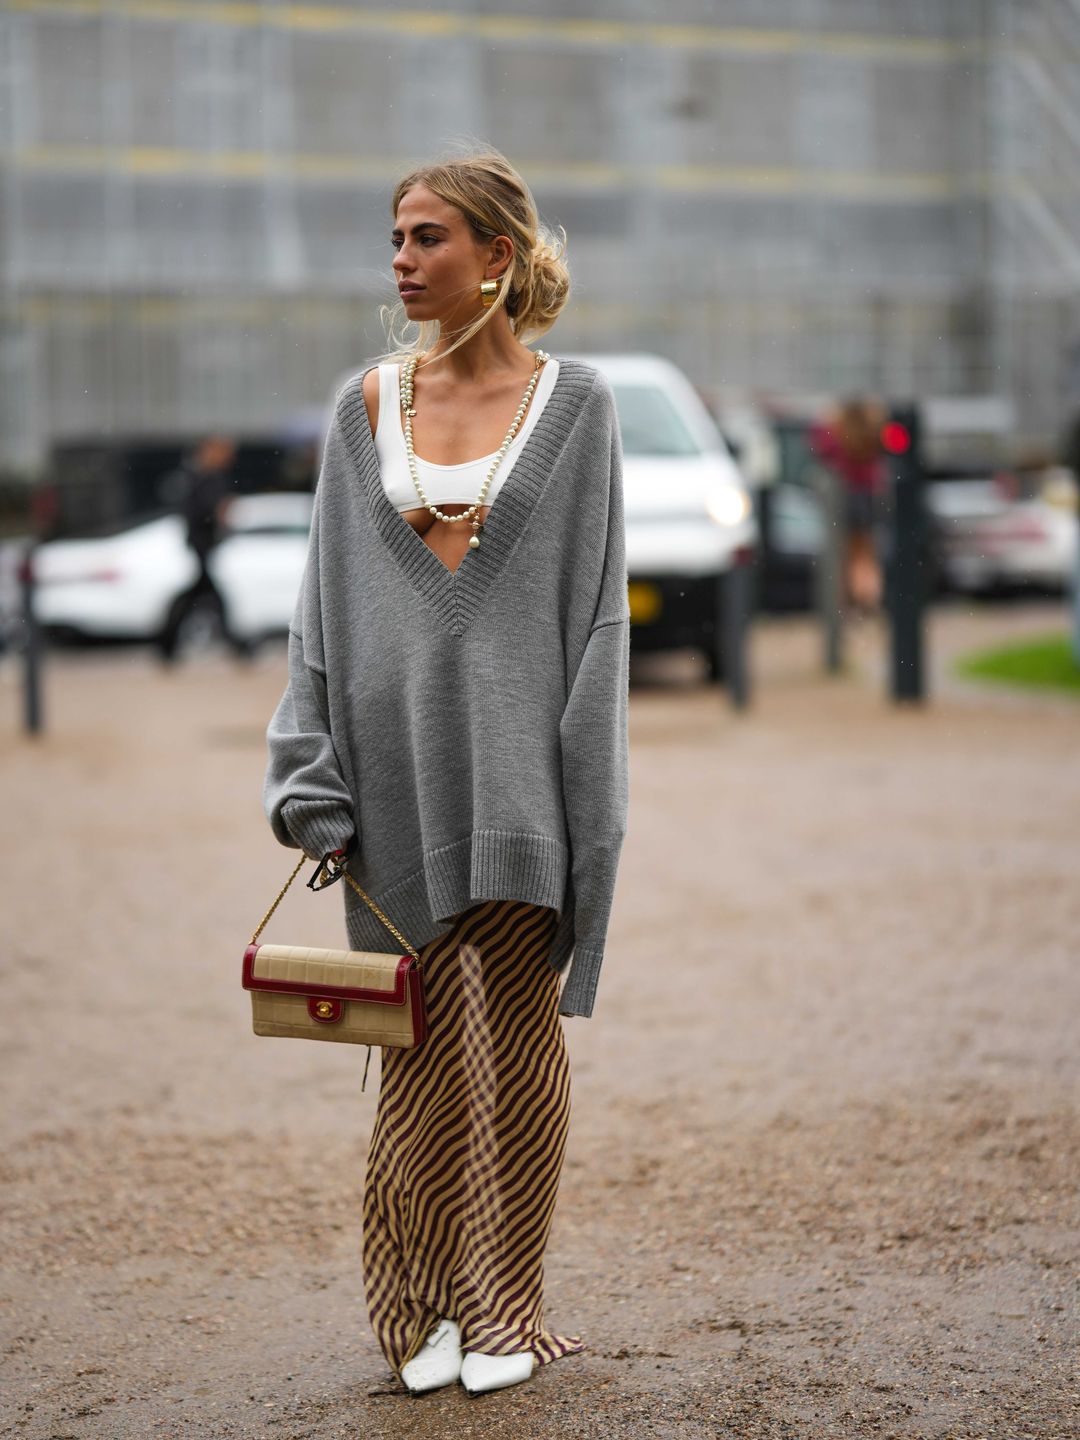 A stylish guest wearing a white micro top, a grey oversized jumper and a striped sheer skirt 